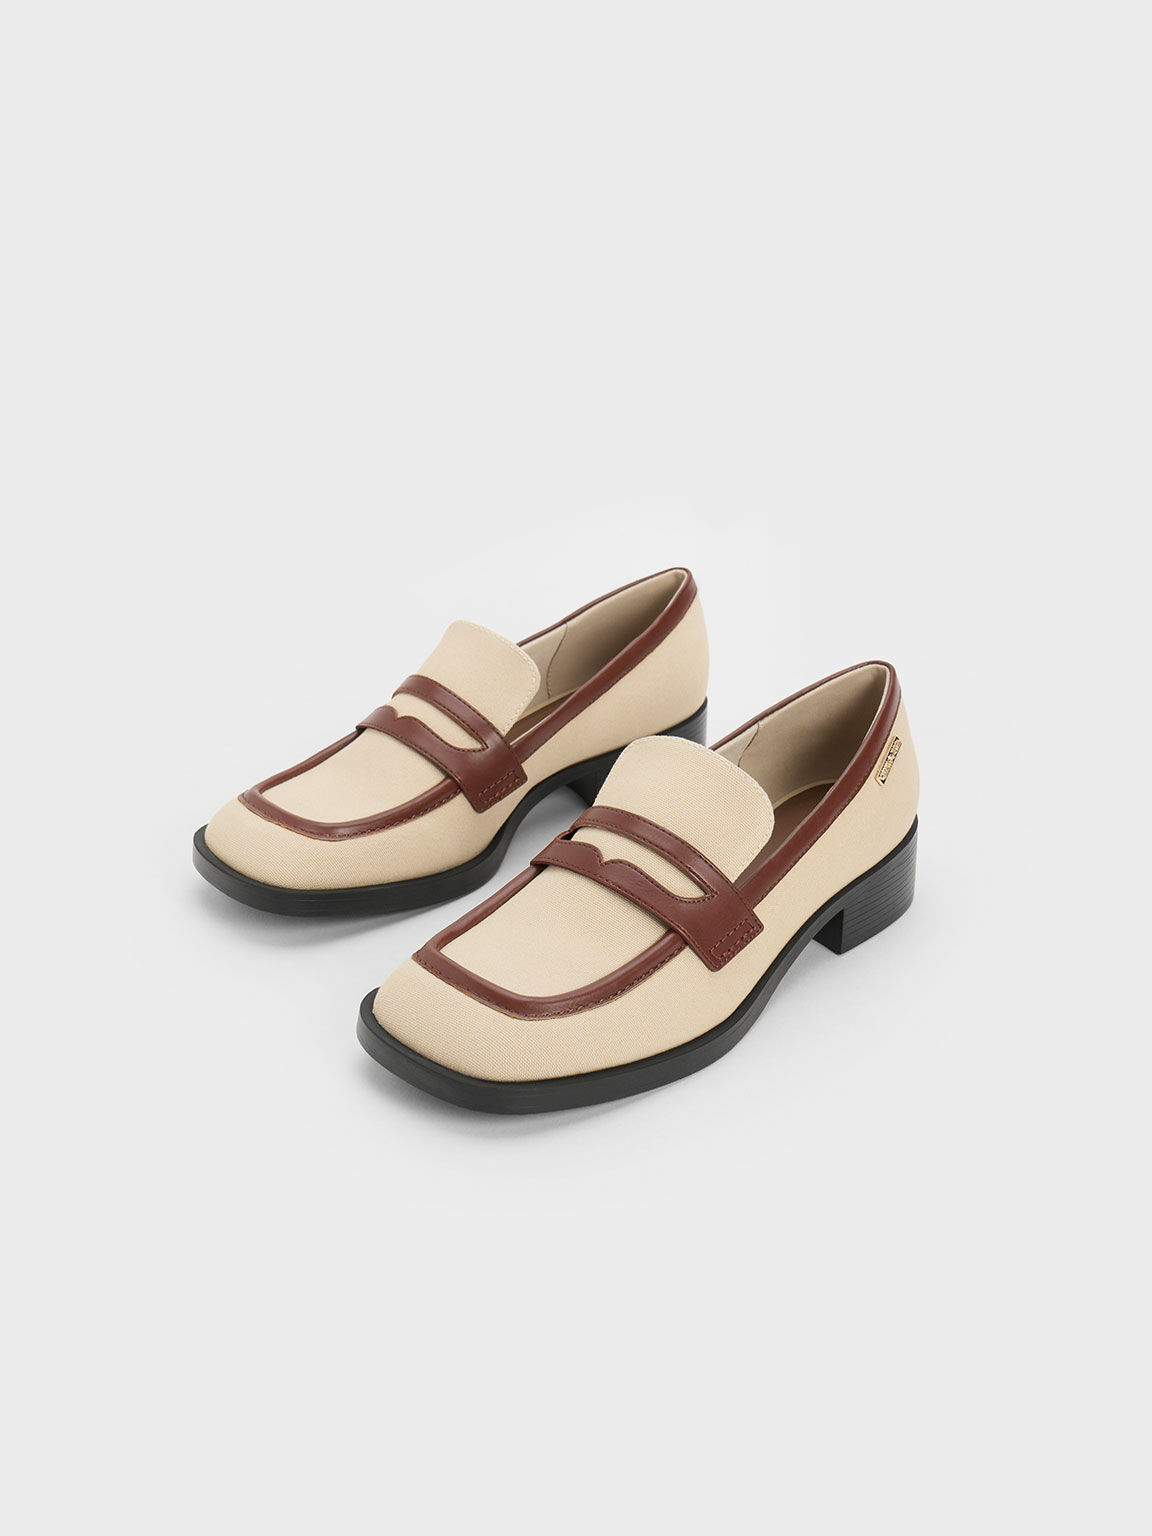 Canvas Cut-Out Penny Loafers, Beige, hi-res